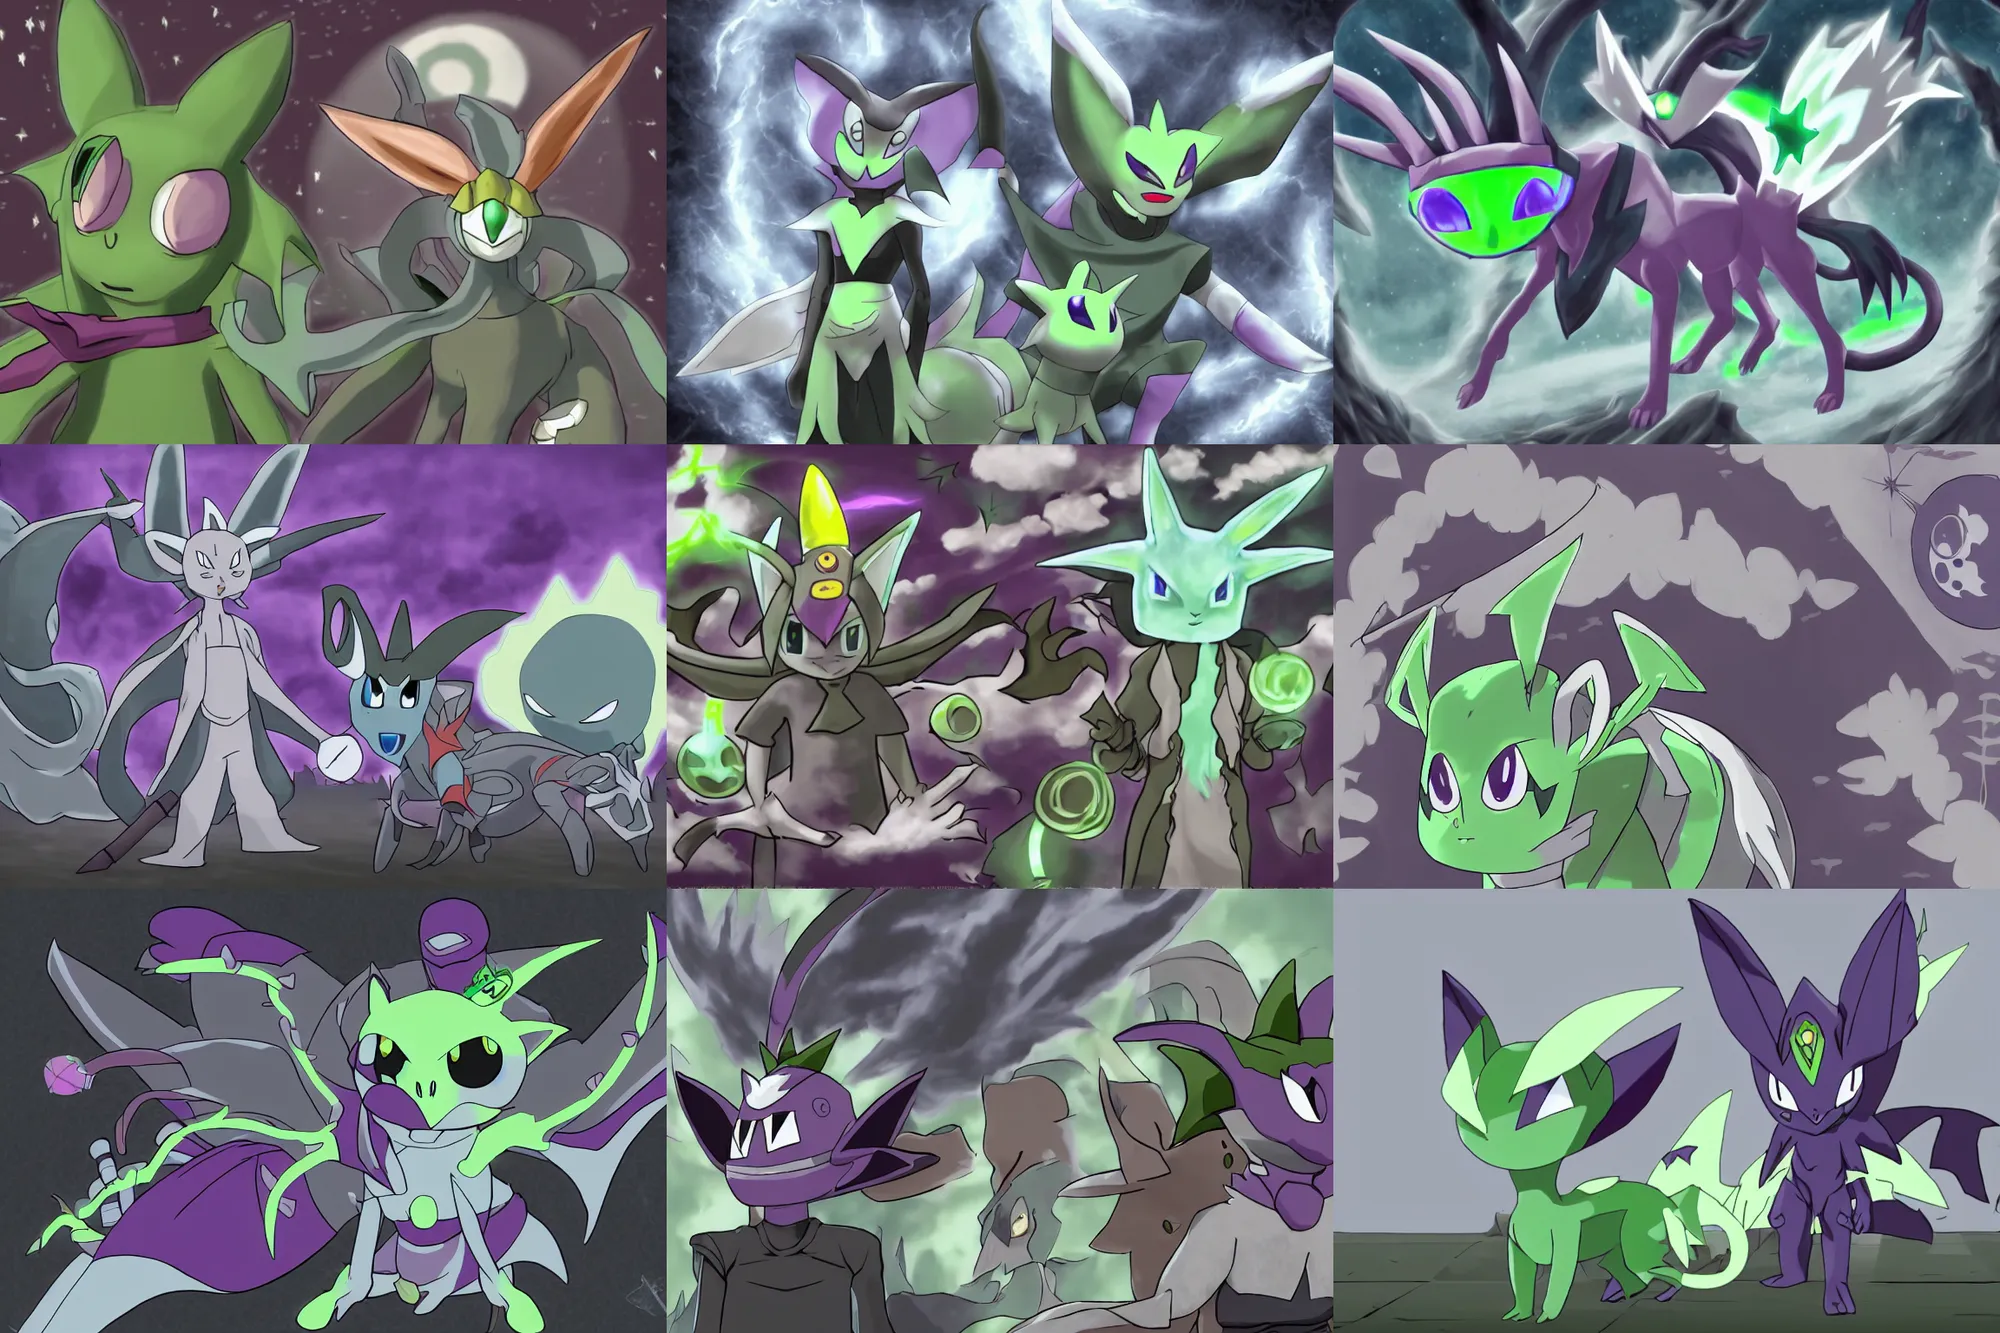 Prompt: grayscale low saturation video game elden celebi : espeons reprisal star valley resident evil mismagius mystery dungeon ultrahd resident eevee wearing bandanna fighting espeon, the old god wearing a witch hat pokemon final gamecube